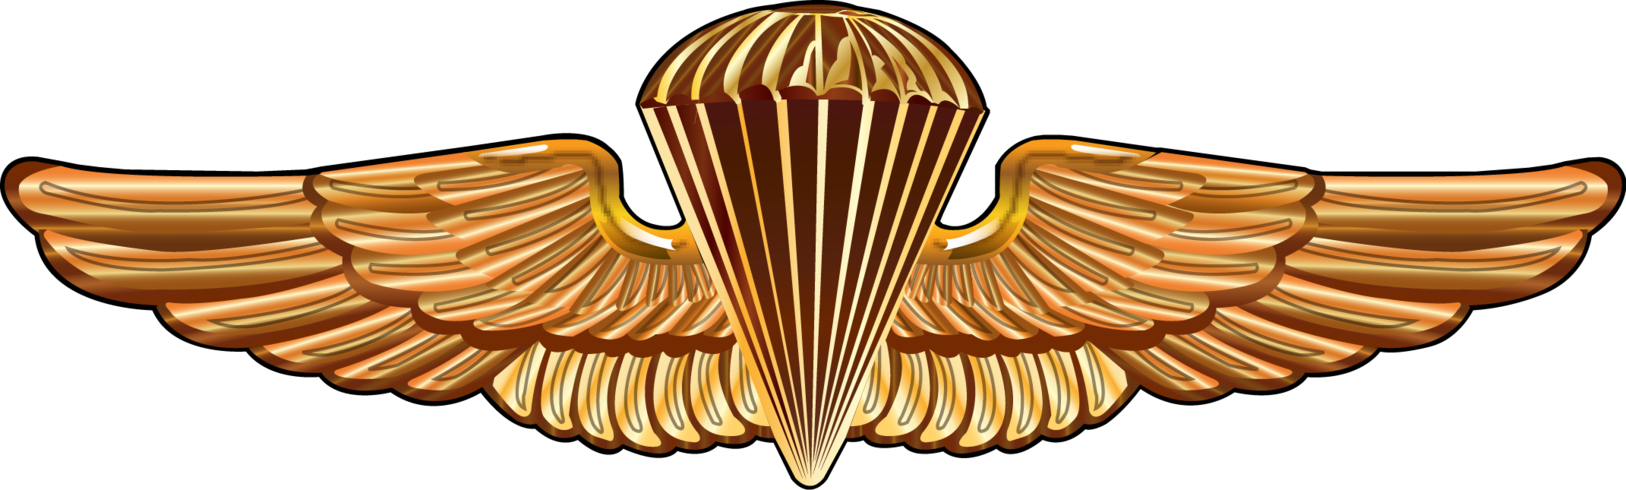 trident clipart gold